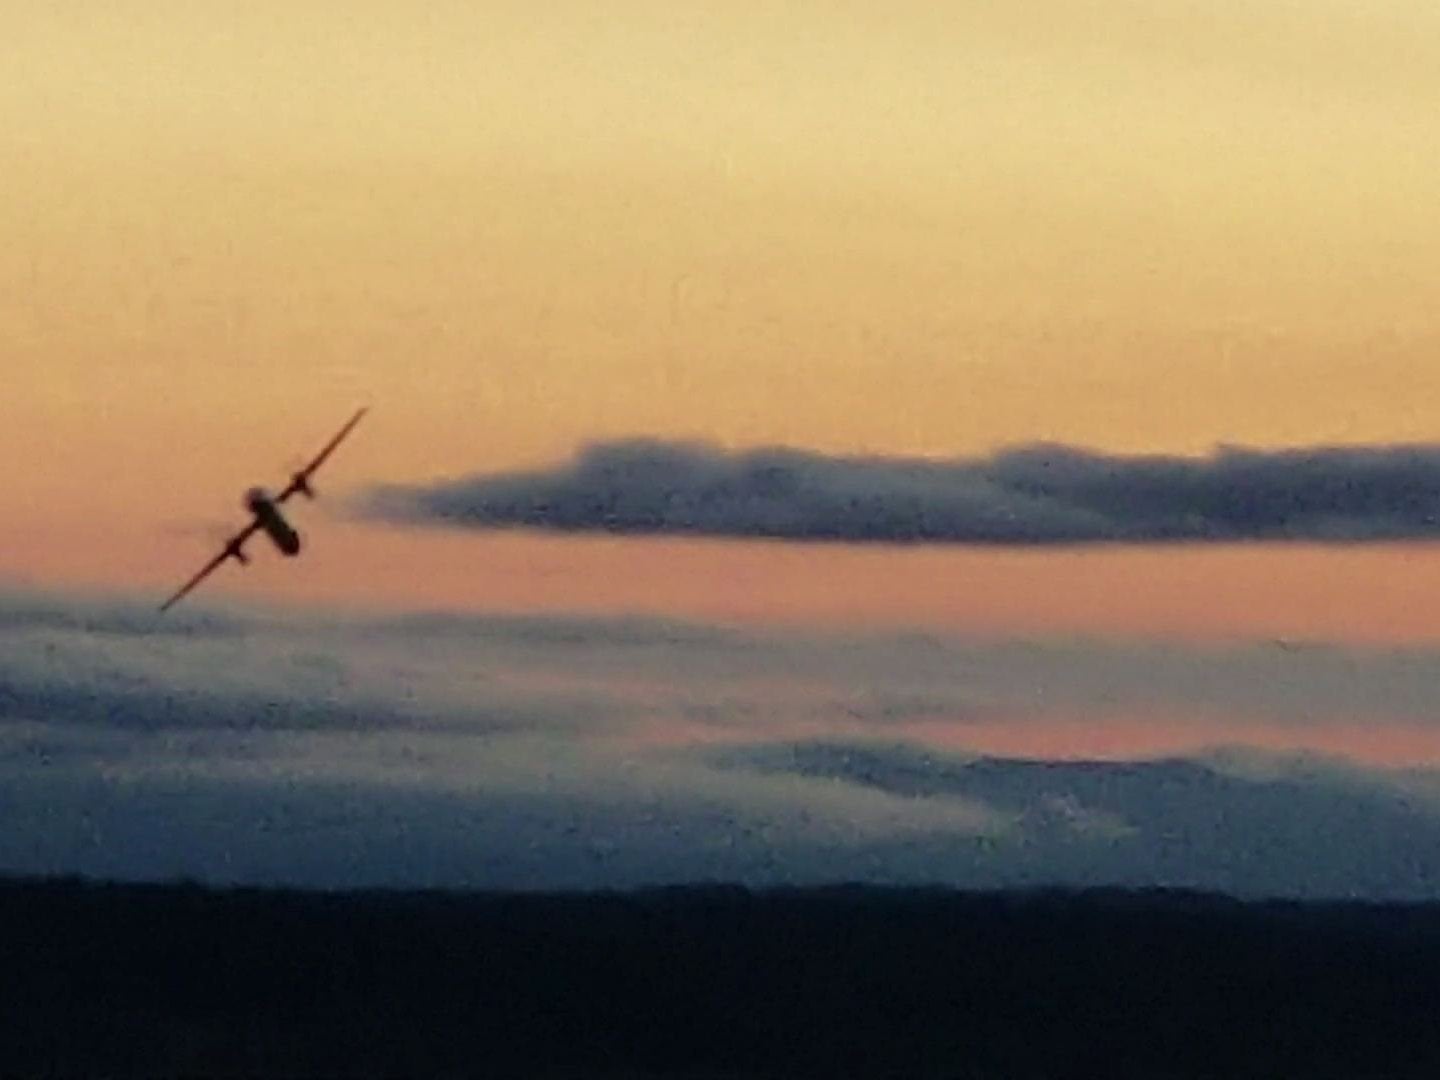 The empty passenger airplane, stolen from the Seattle-Tacoma airport, making an unlikely upside-down aerial loop, then flying low over Puget Sound before crashing into the sparsely populated Ketron Island